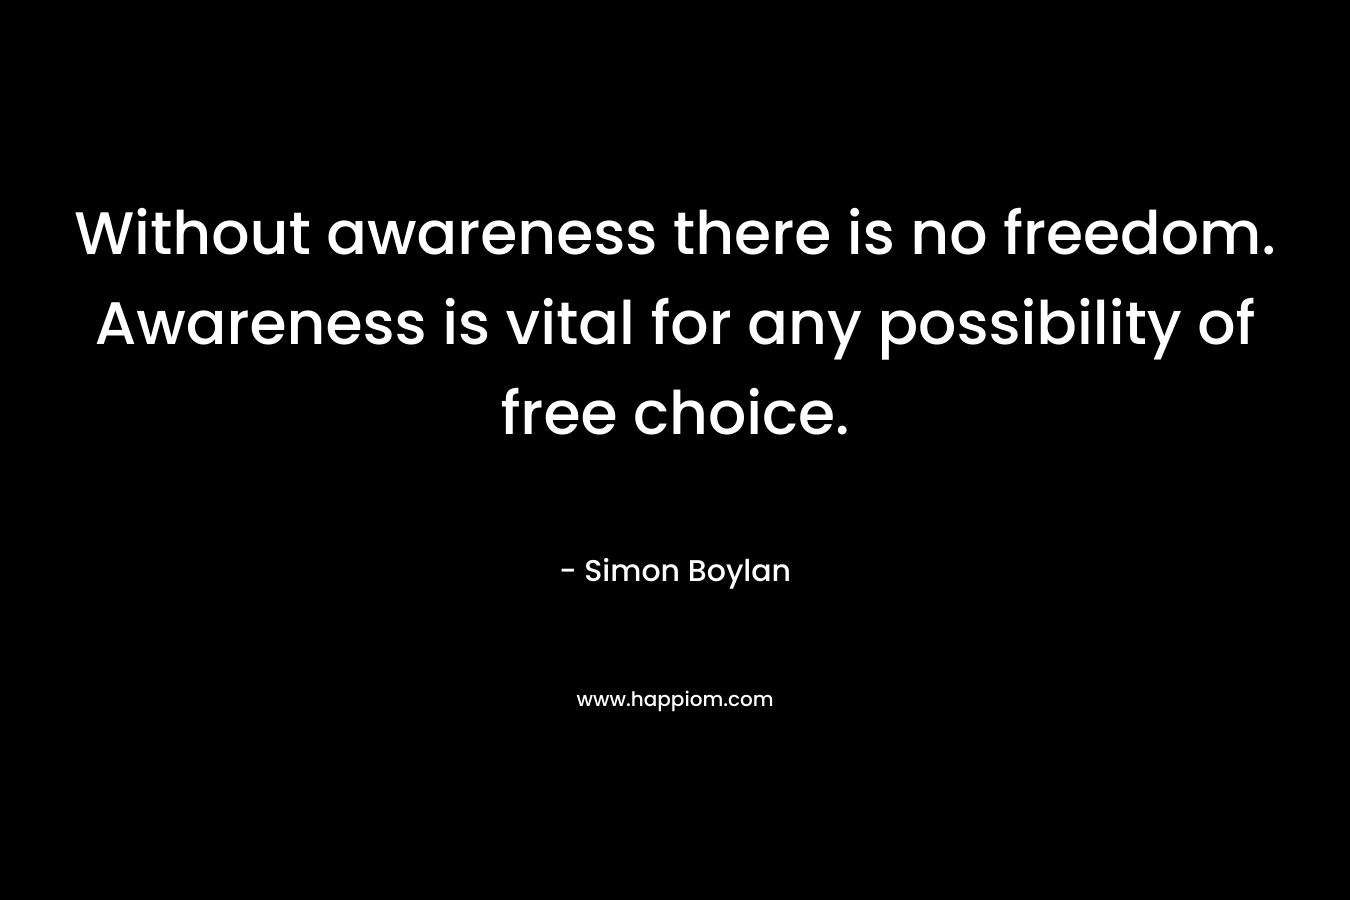 Without awareness there is no freedom. Awareness is vital for any possibility of free choice. – Simon Boylan